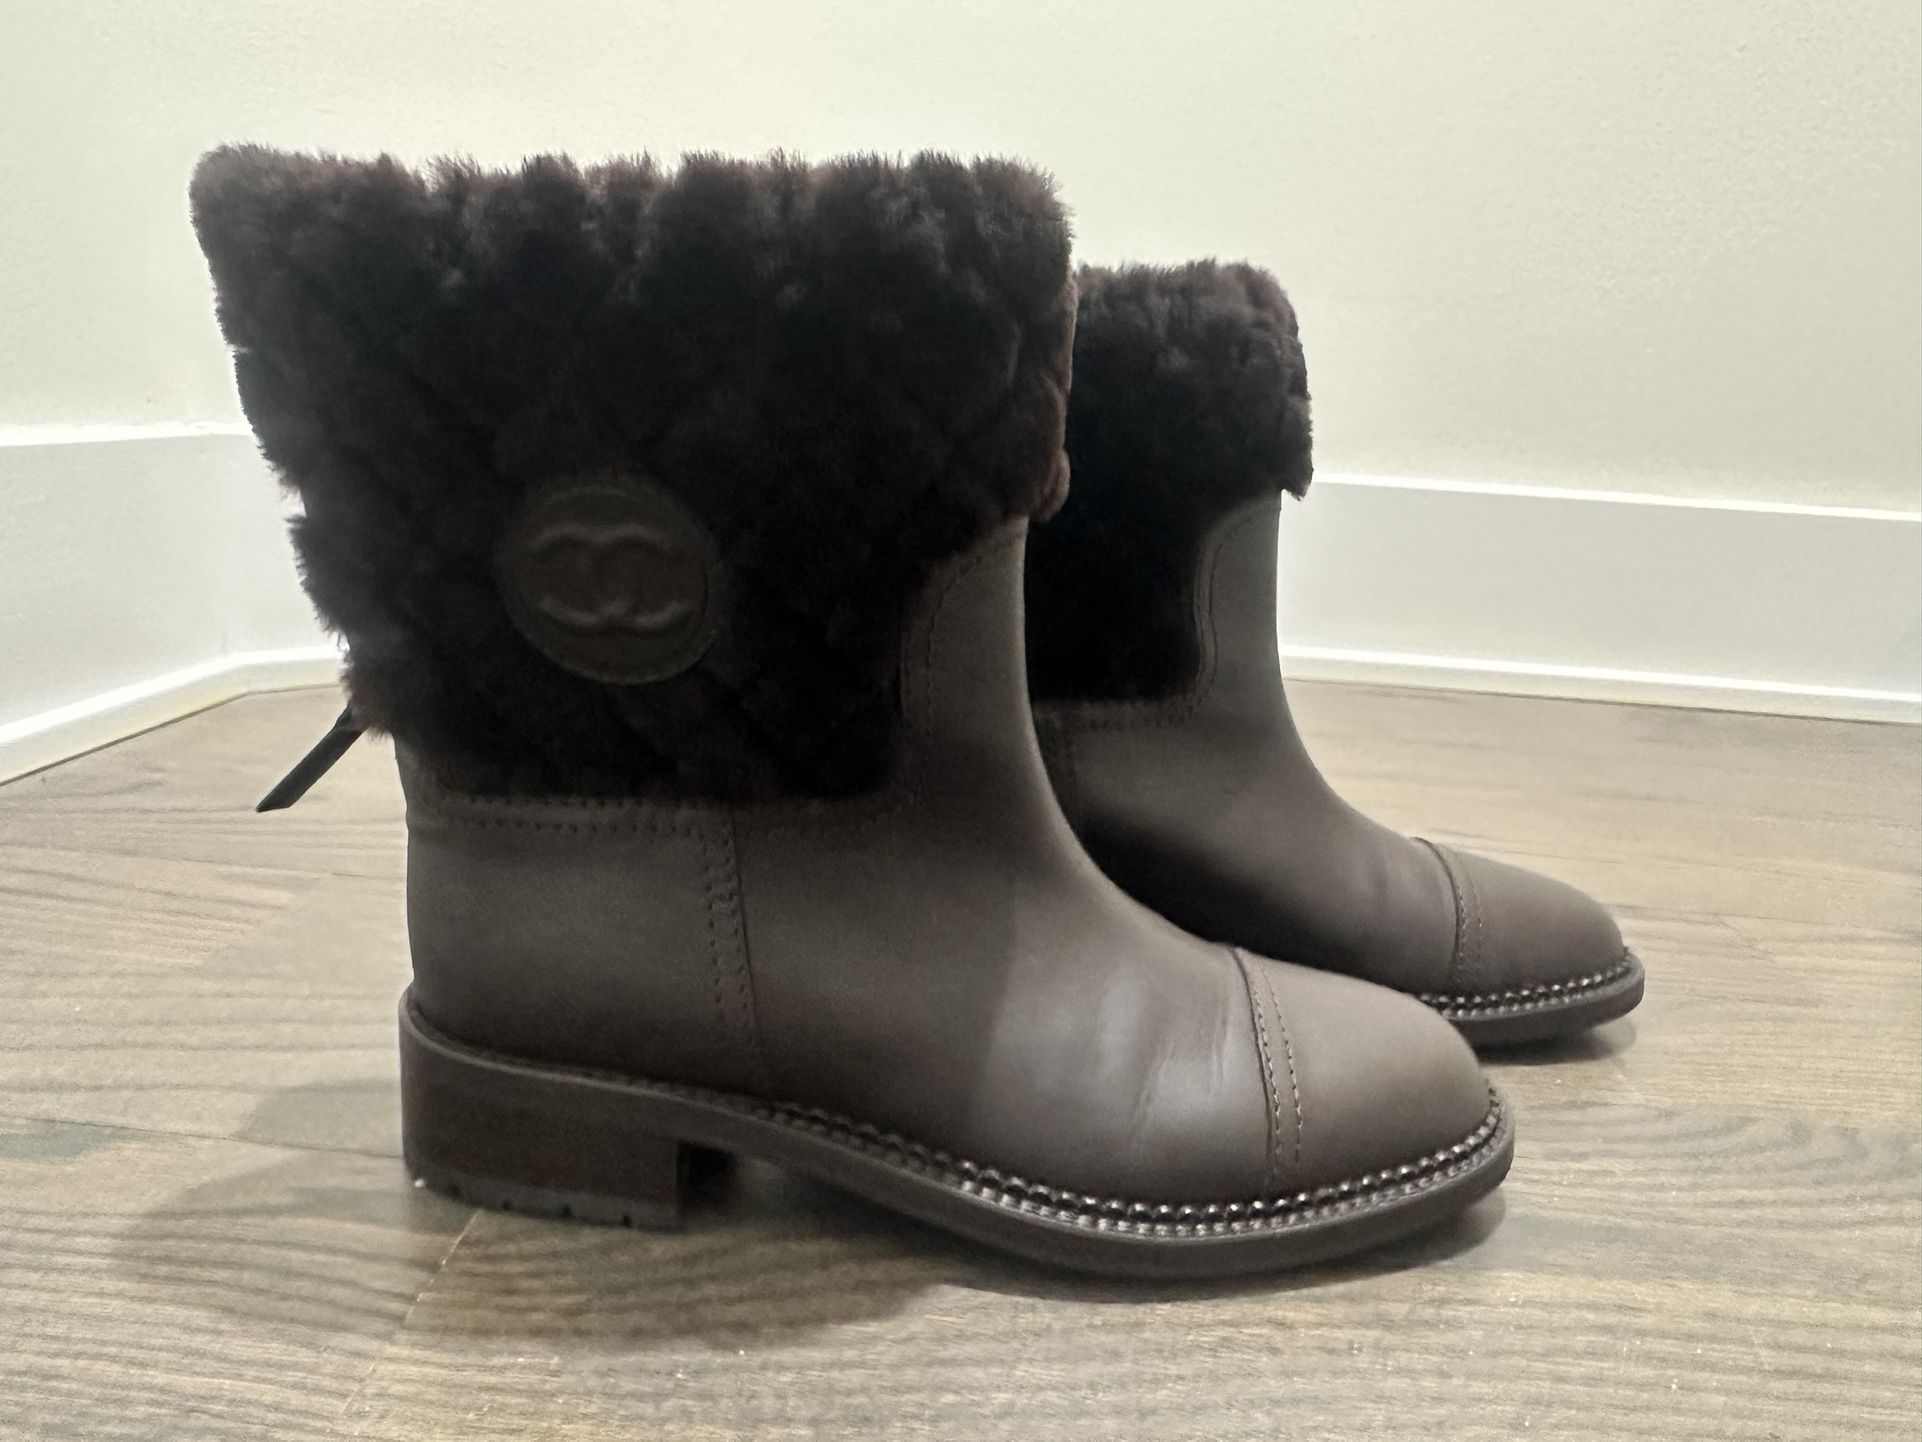 Chanel Leather Wedges for Sale in Irvine, CA - OfferUp